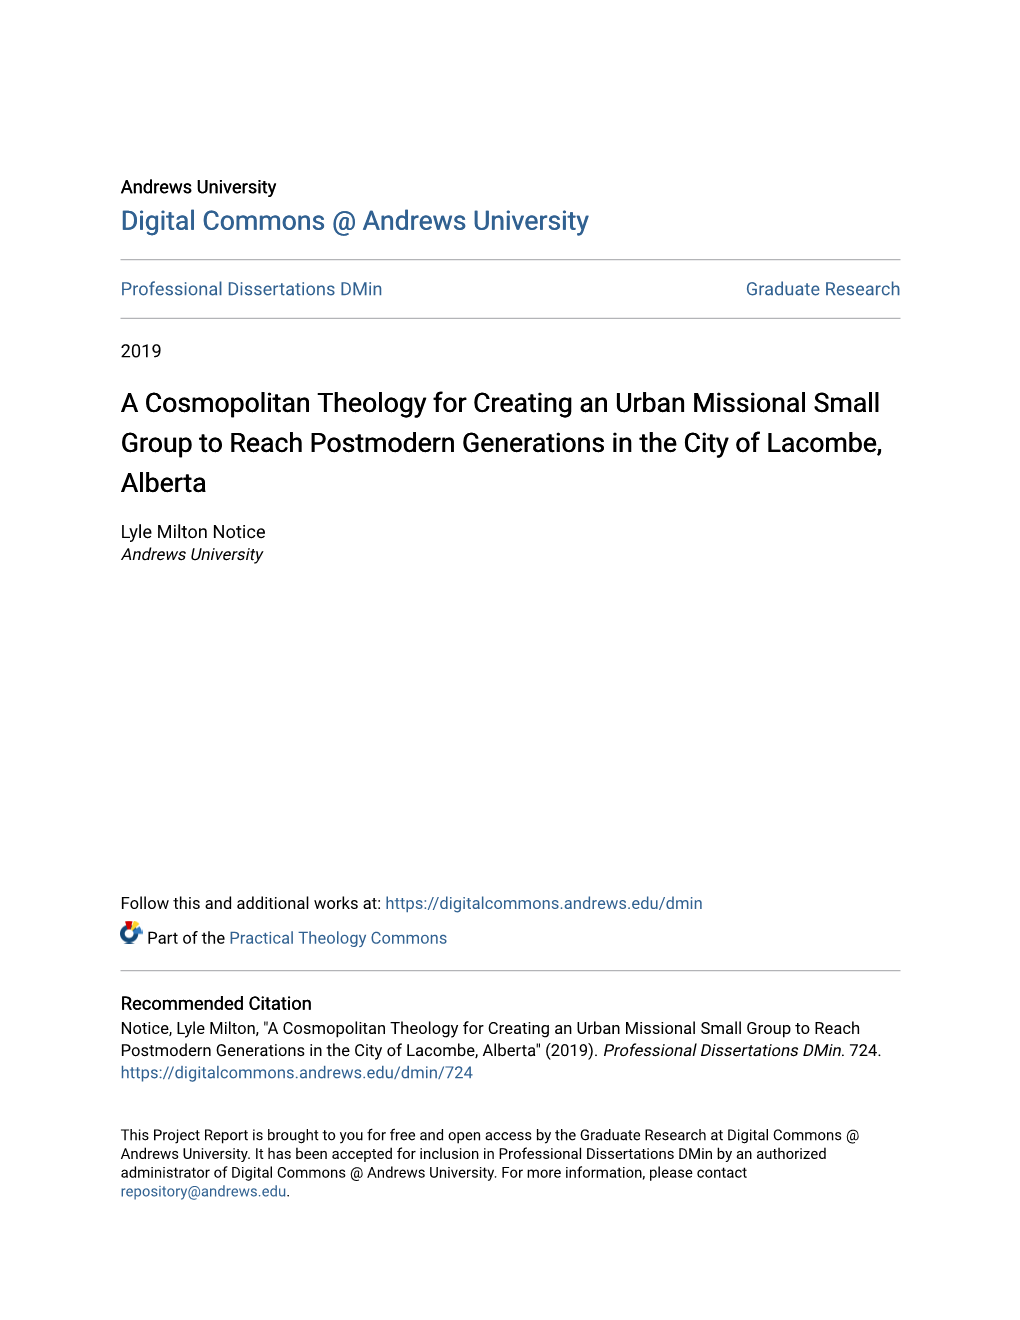 A Cosmopolitan Theology for Creating an Urban Missional Small Group to Reach Postmodern Generations in the City of Lacombe, Alberta